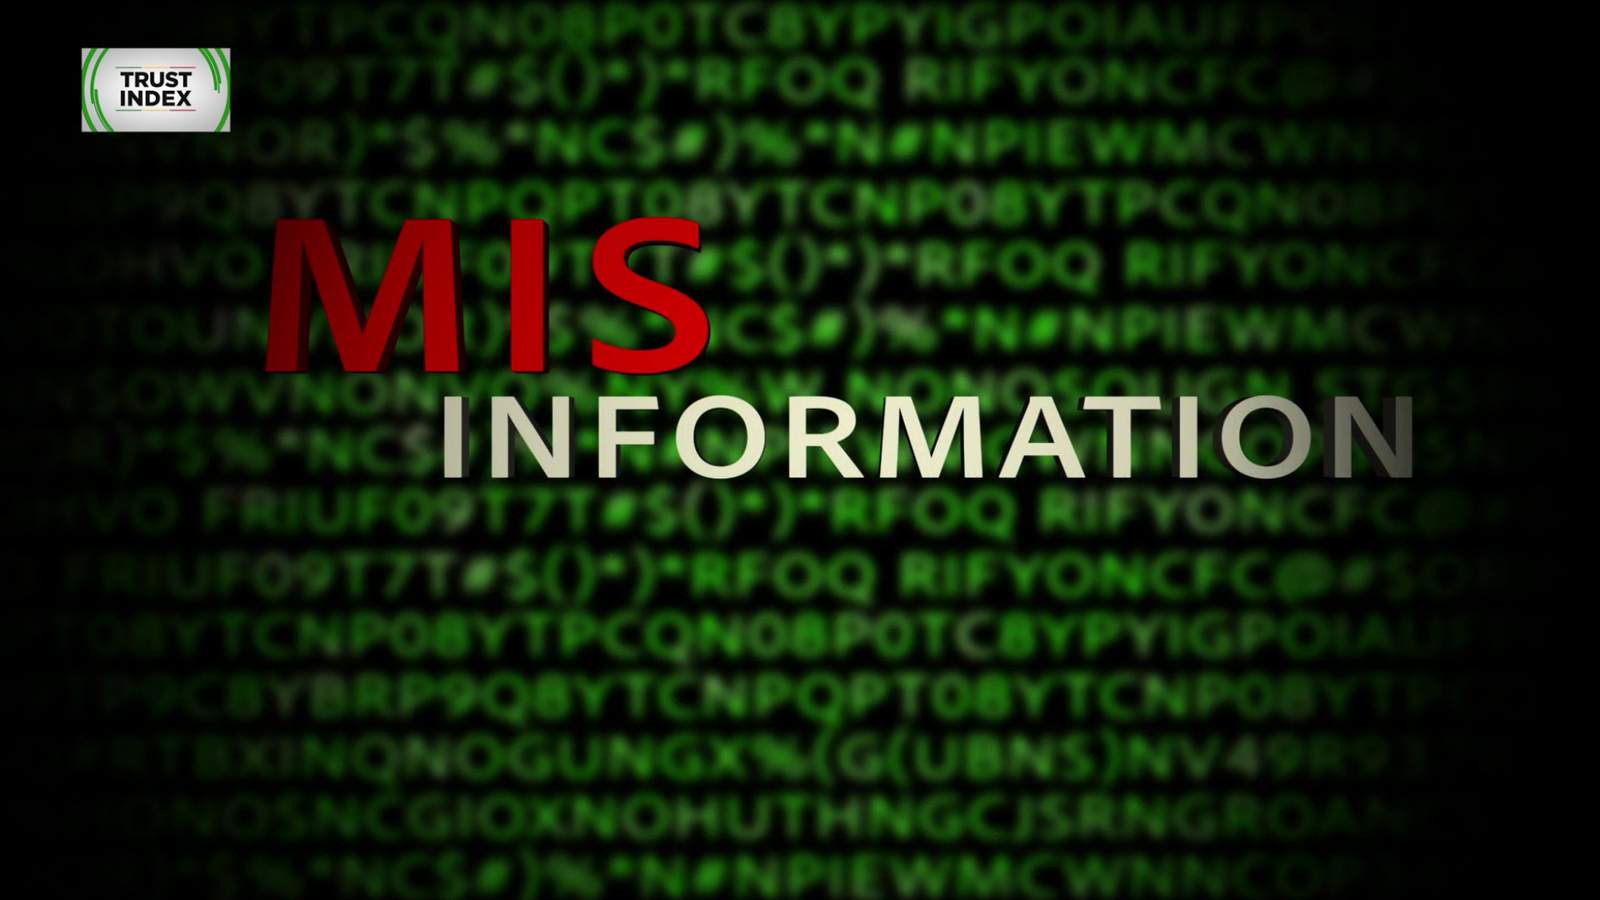 Misinformation and disinformation: What it is, how to spot it, what to do